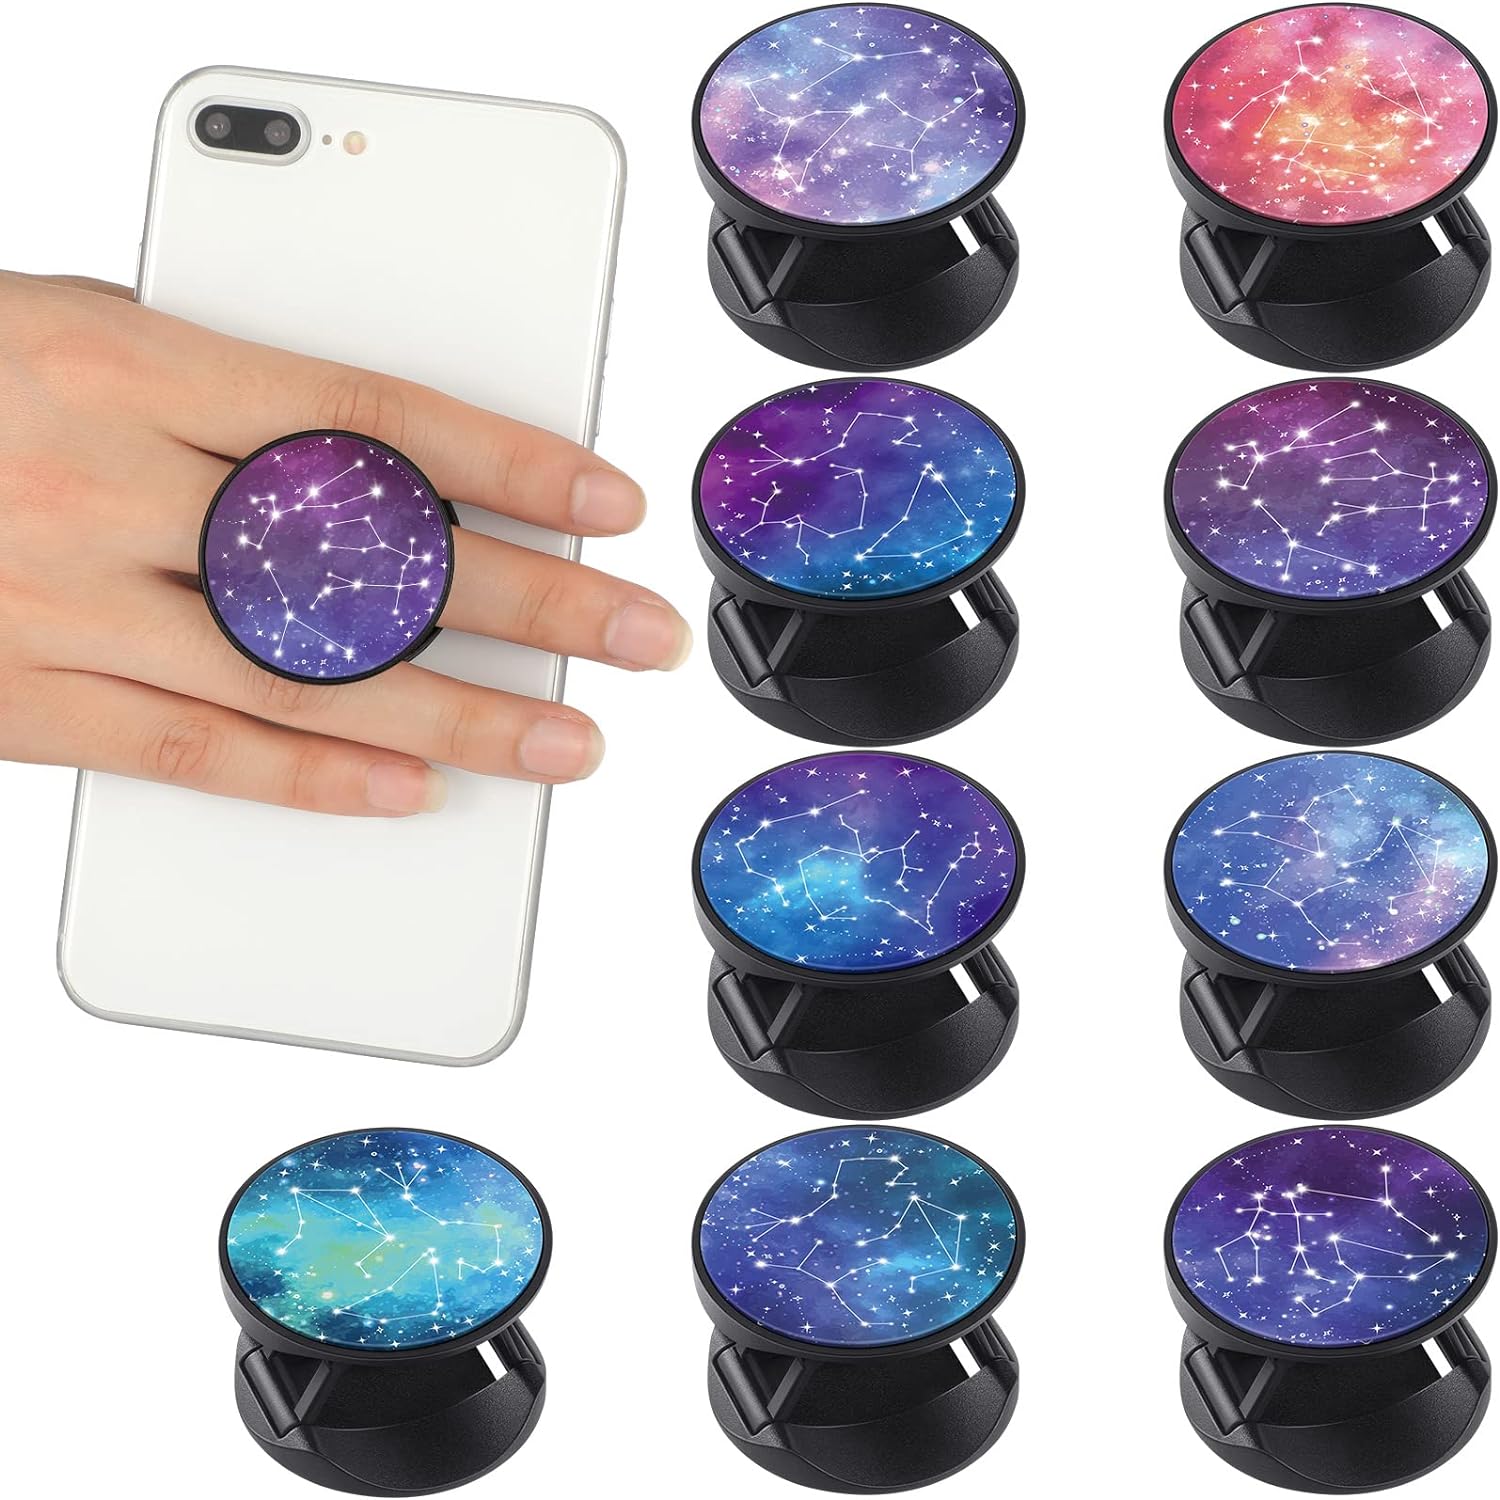 9 Pieces Cell Phone Grip Holder Collapsible Phone Holder Colorful Self-Adhesive Finger Ring Sublimation Phone Holders for Smartphone and Tablets (Constellation Style)